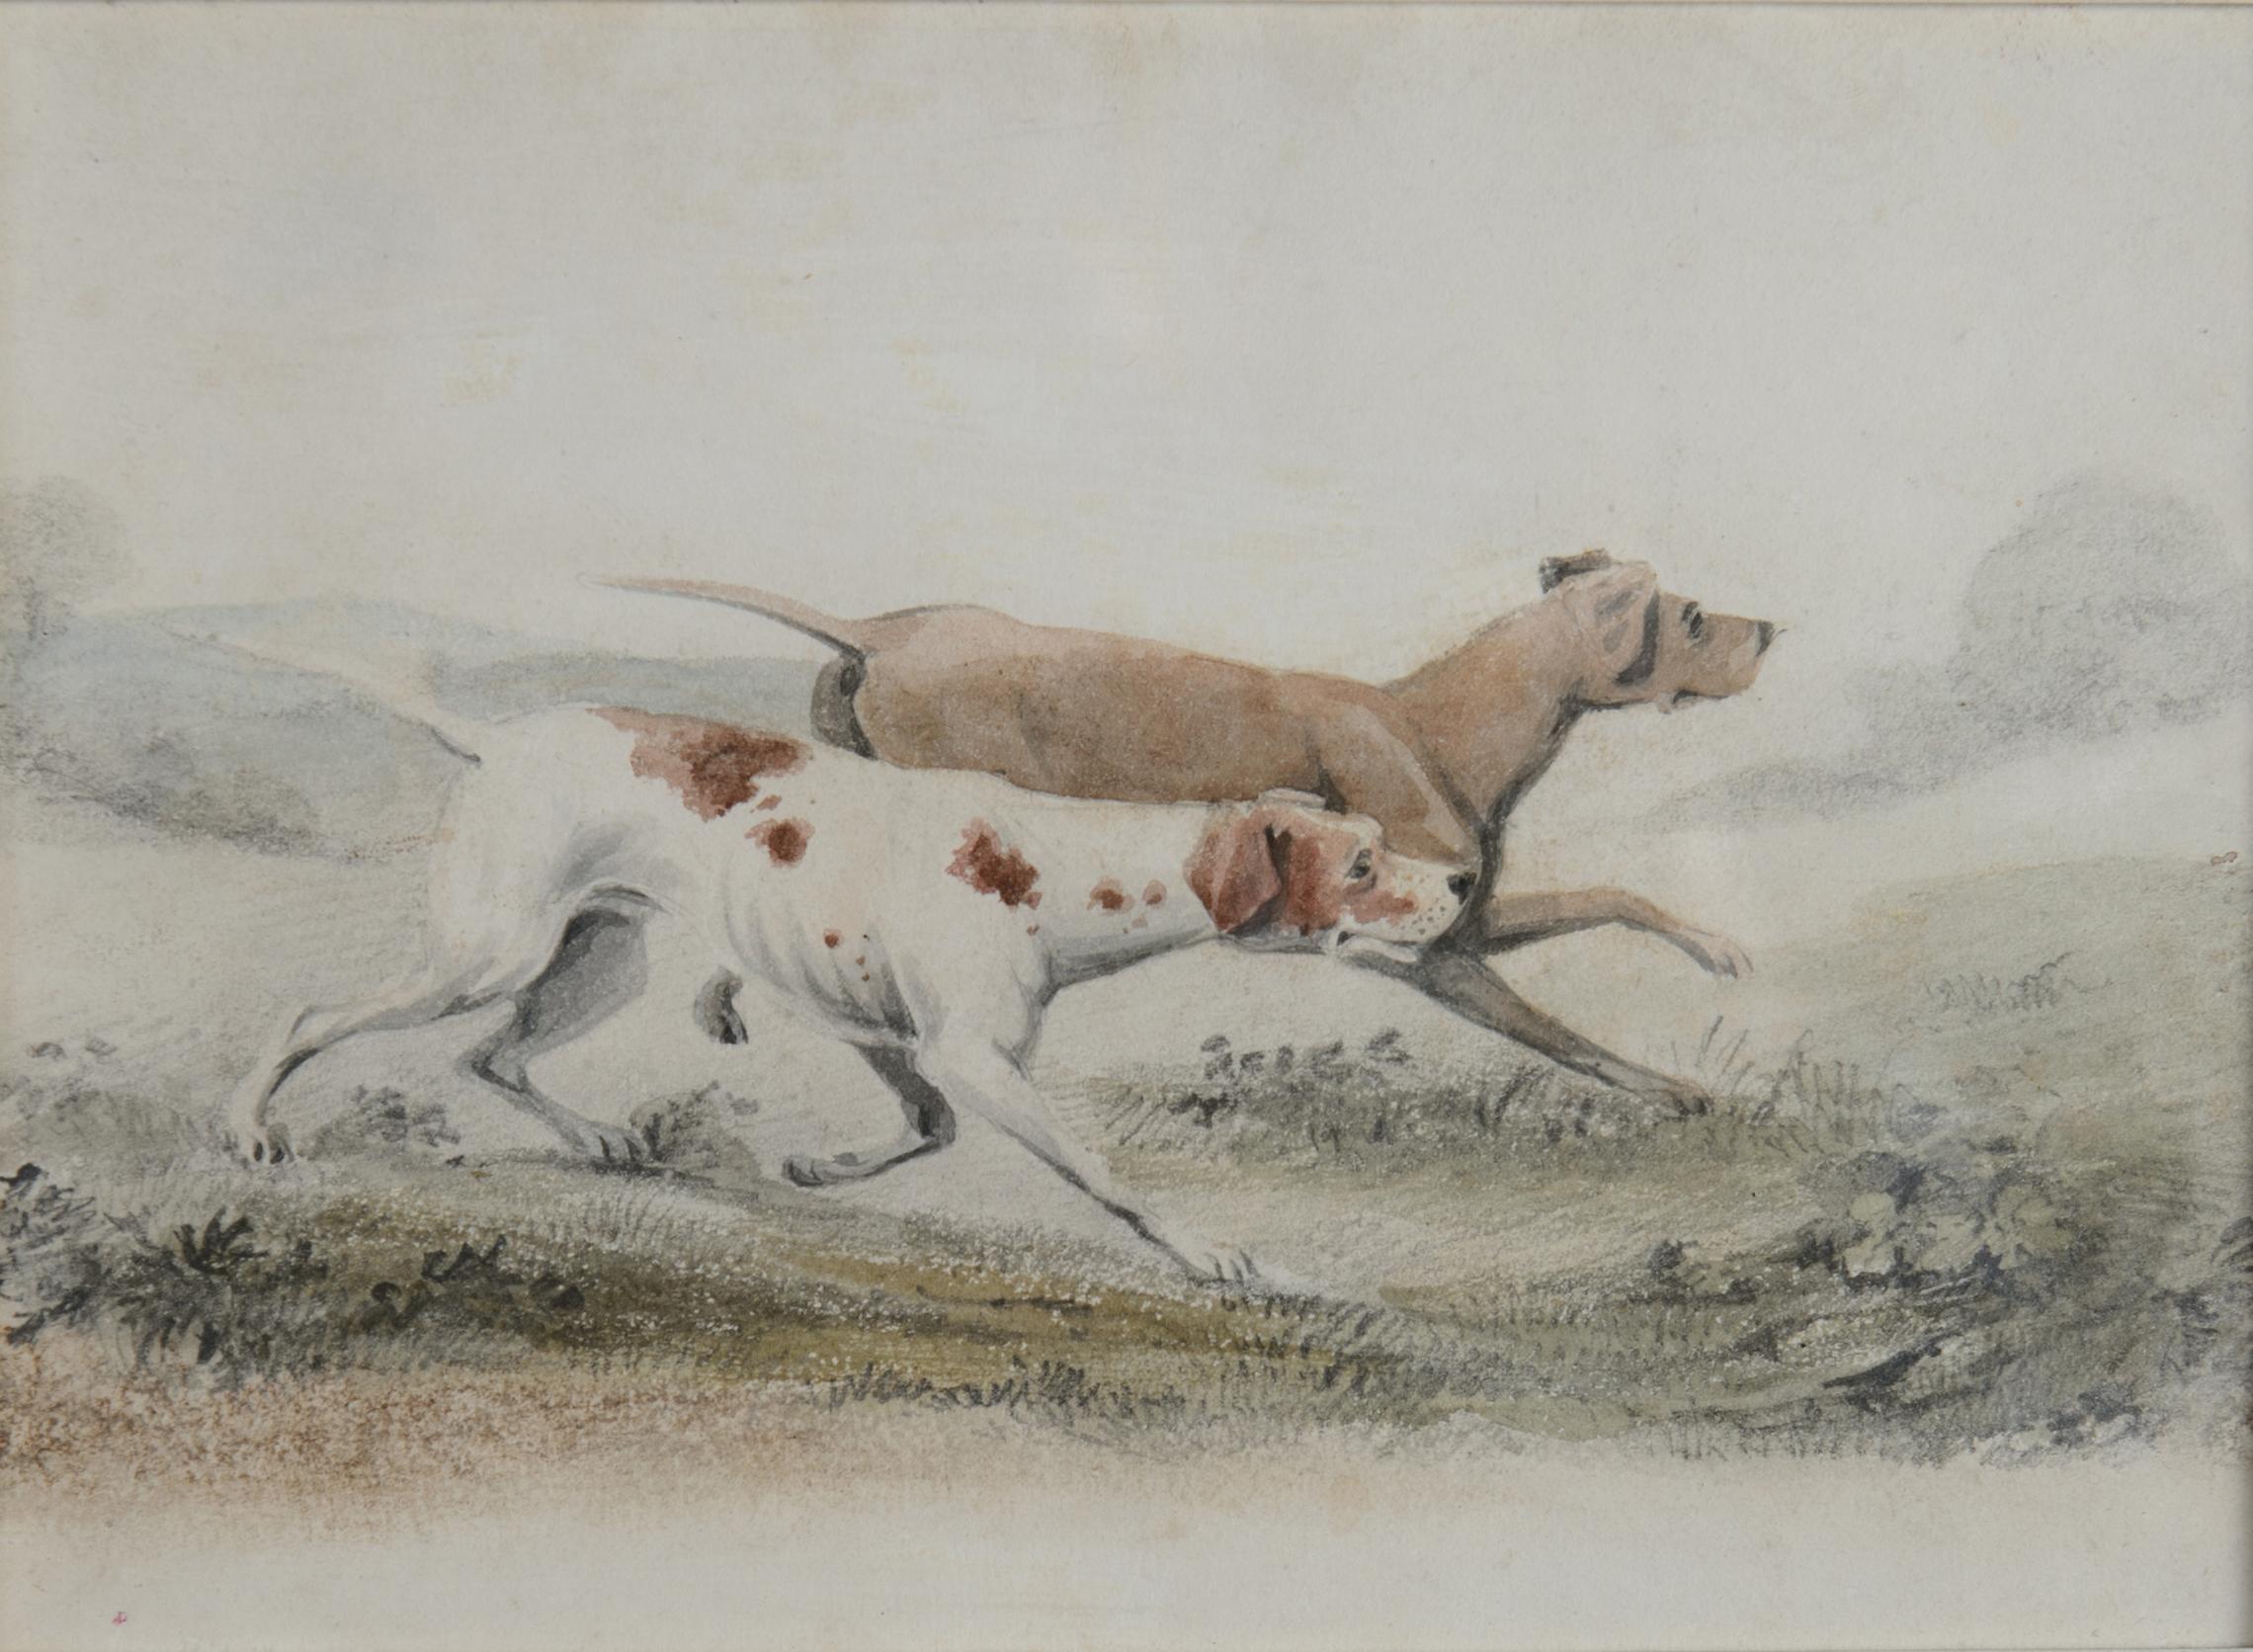 Unknown Animal Art - Two Pointers in a Landscape - 19th century watercolour of dogs